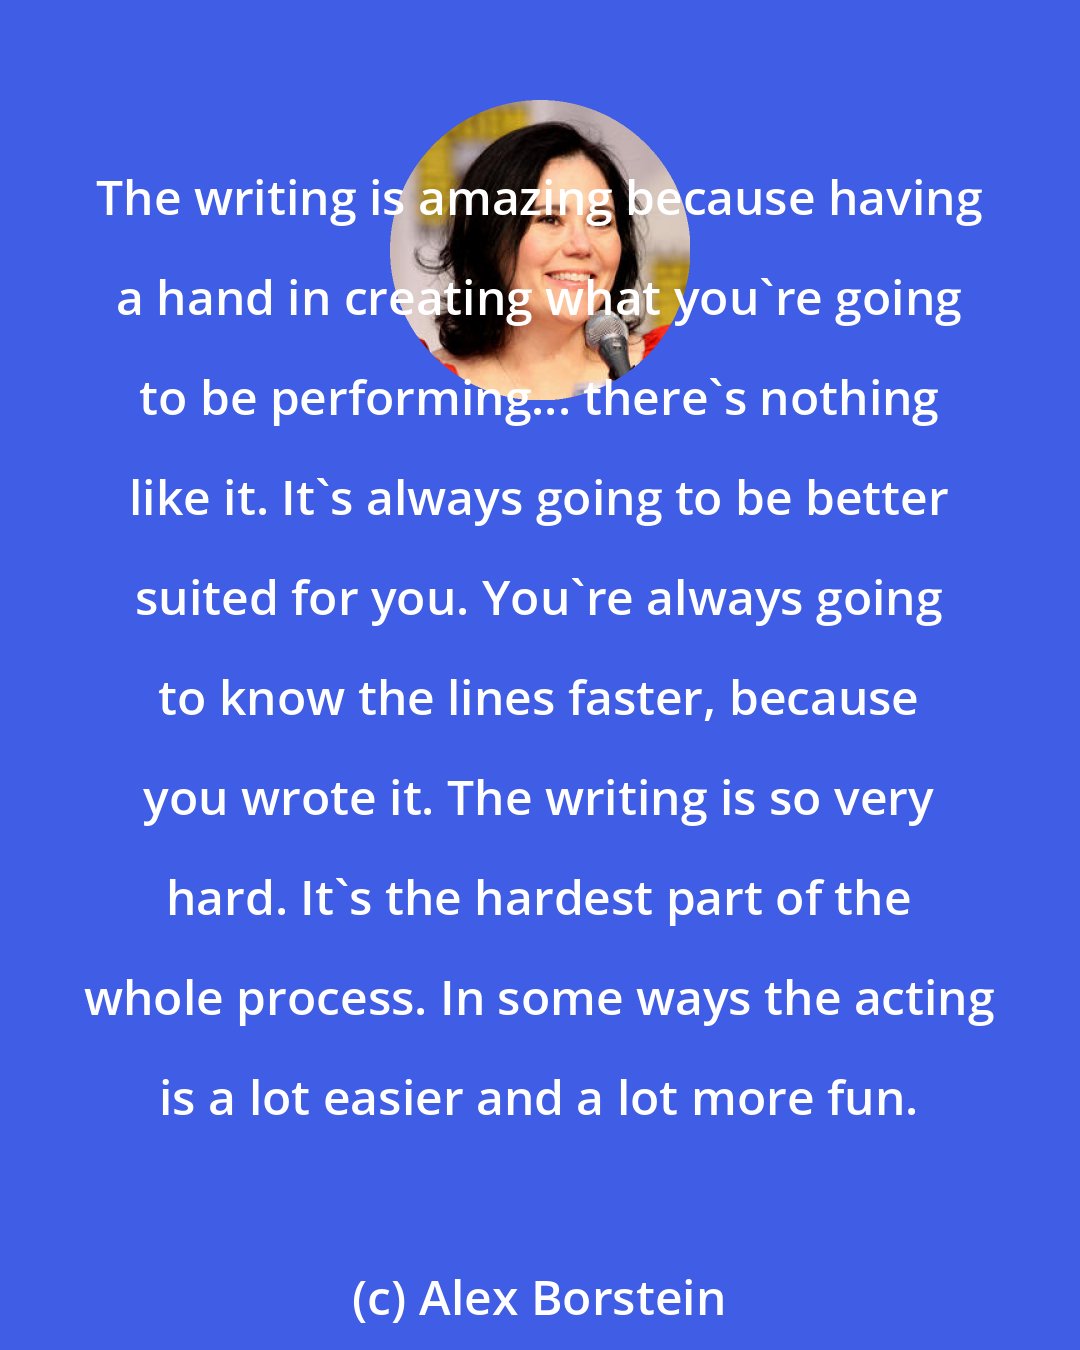 Alex Borstein: The writing is amazing because having a hand in creating what you're going to be performing... there's nothing like it. It's always going to be better suited for you. You're always going to know the lines faster, because you wrote it. The writing is so very hard. It's the hardest part of the whole process. In some ways the acting is a lot easier and a lot more fun.